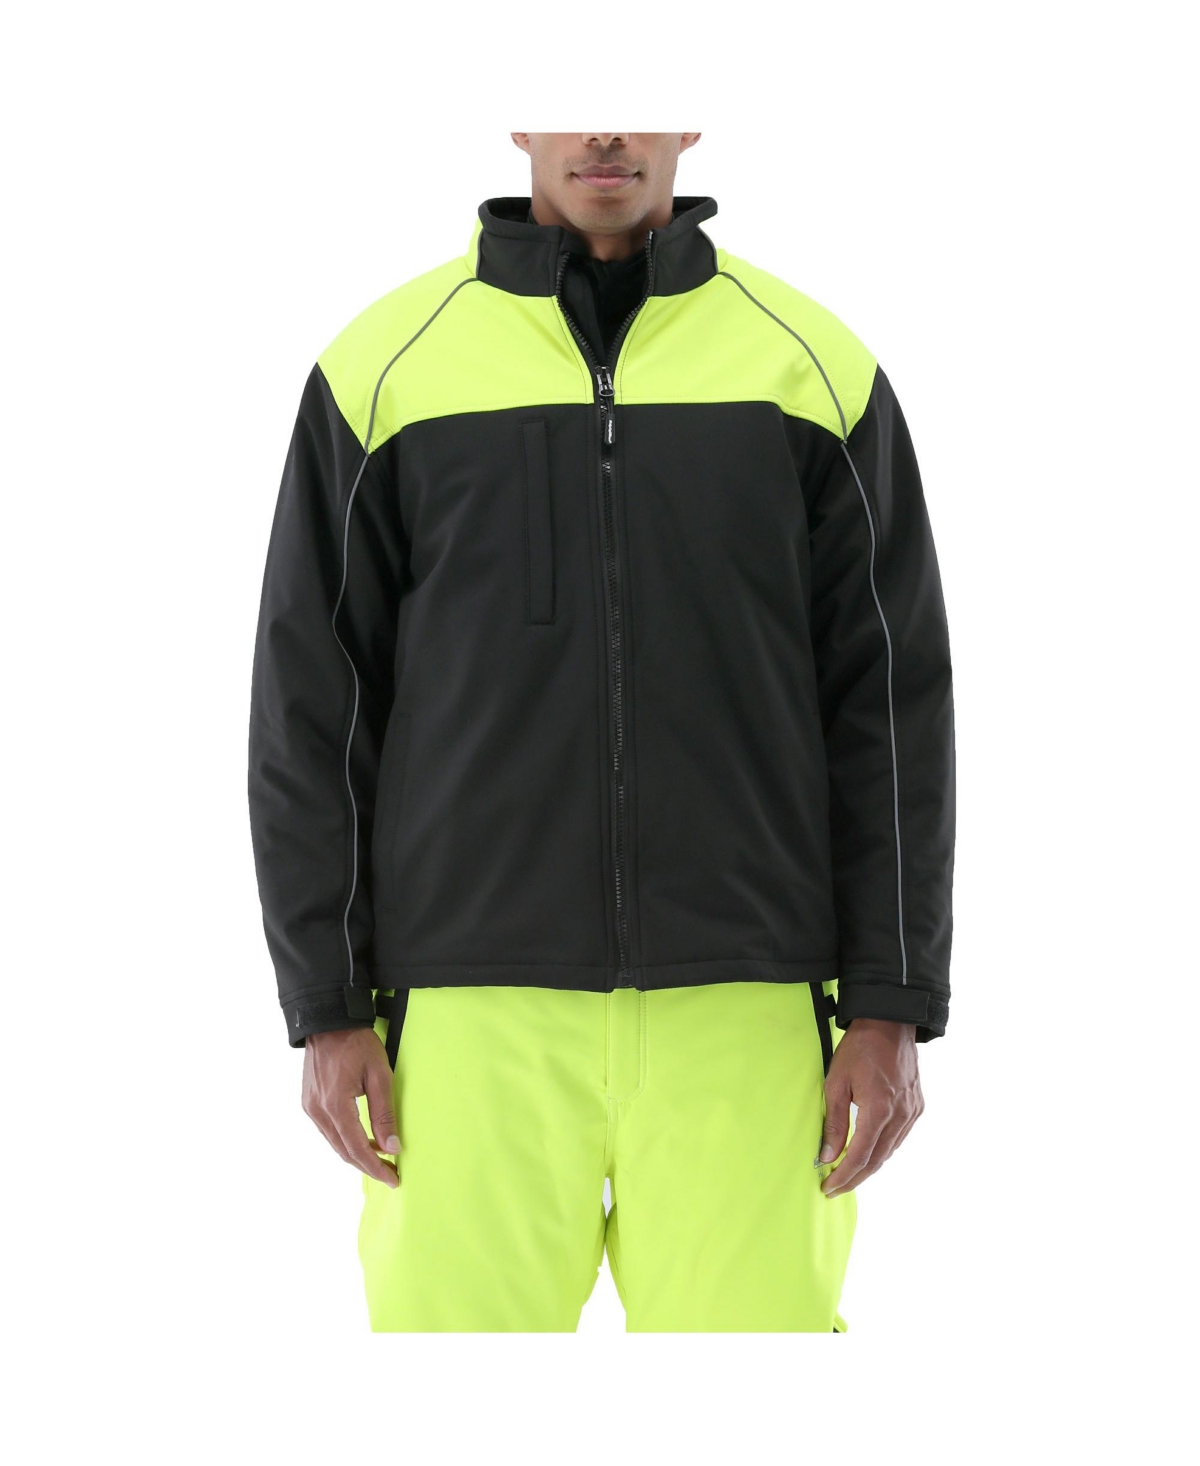 Men's Two-Tone HiVis Insulated Jacket - Black